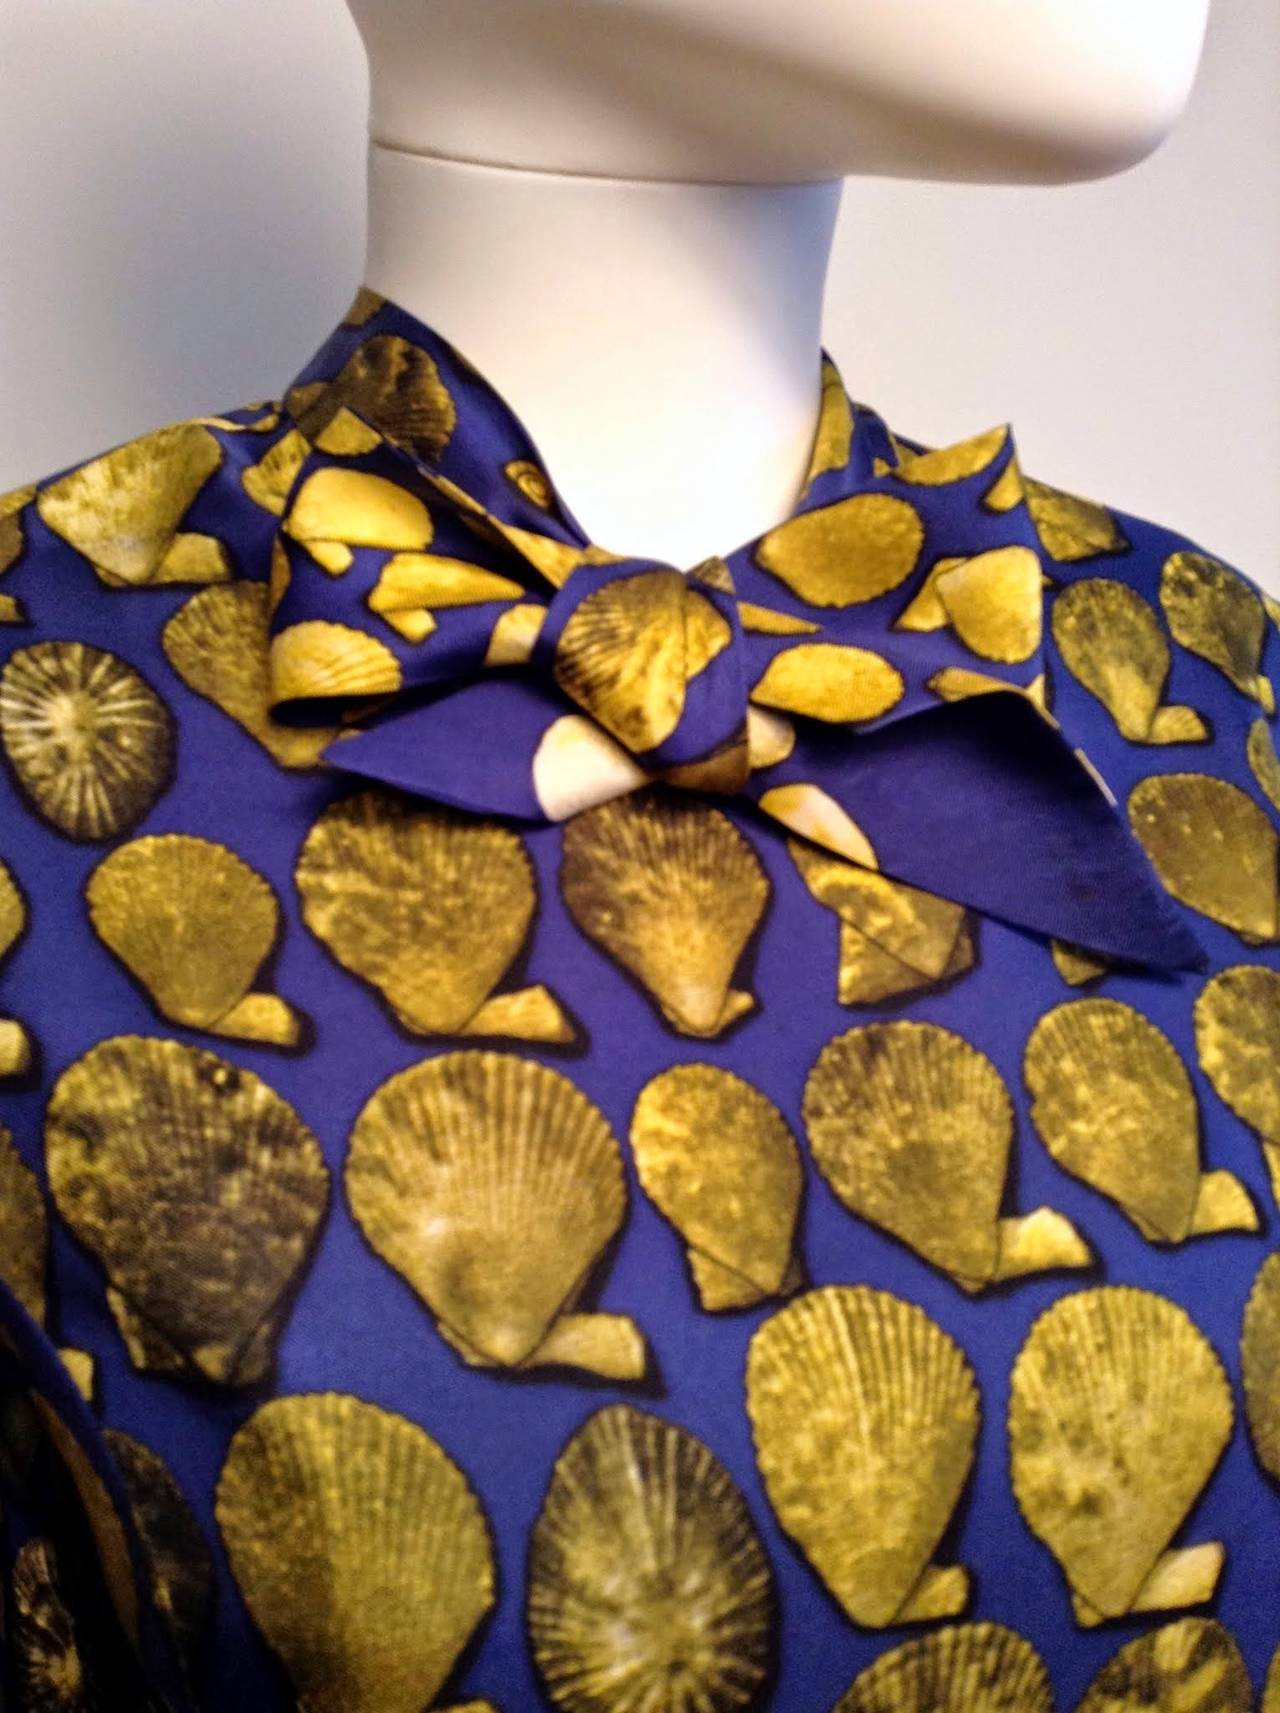 Late 60's stunning vintage Hermes silk 'coquilles' print blouse, with neck tie. The blouse is beautifully tailored, buttoning up the by using six silk-covered buttons and featuring classy details such as hand-sewn interior seams. Would be a great